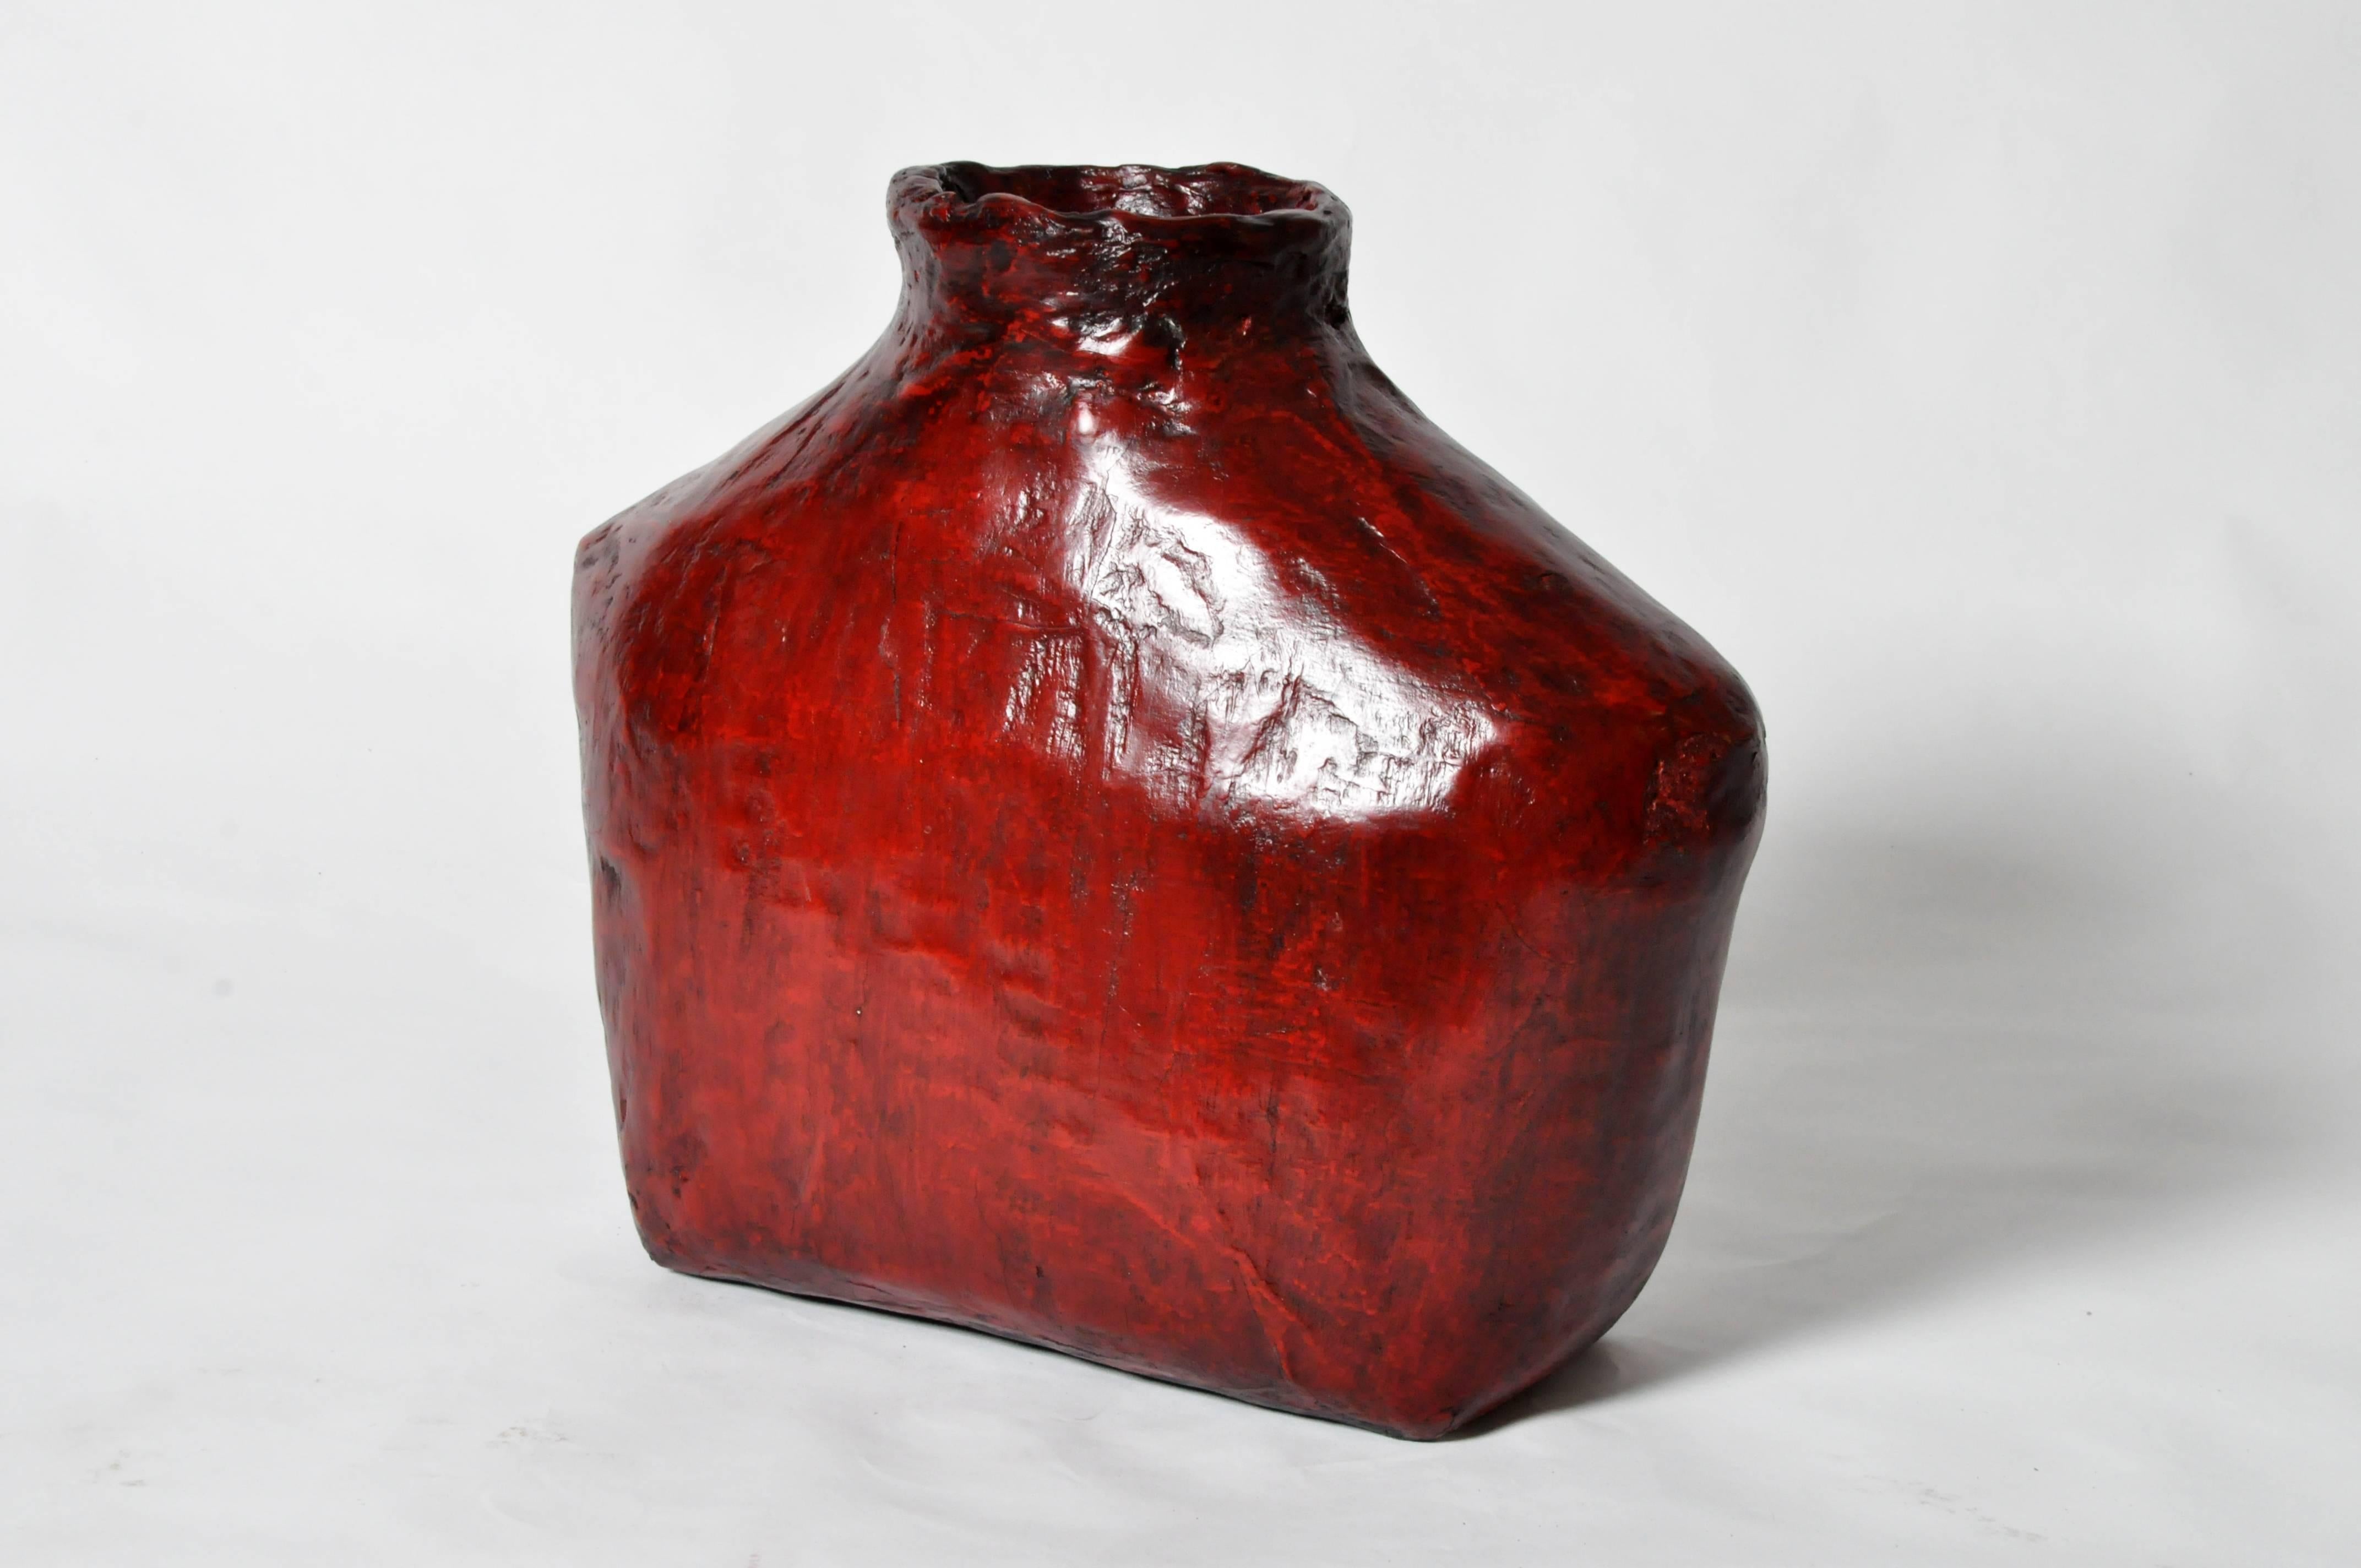 These Chinese red lacquered pots are from Guizhou, China and can be used as beautiful accessories accents.